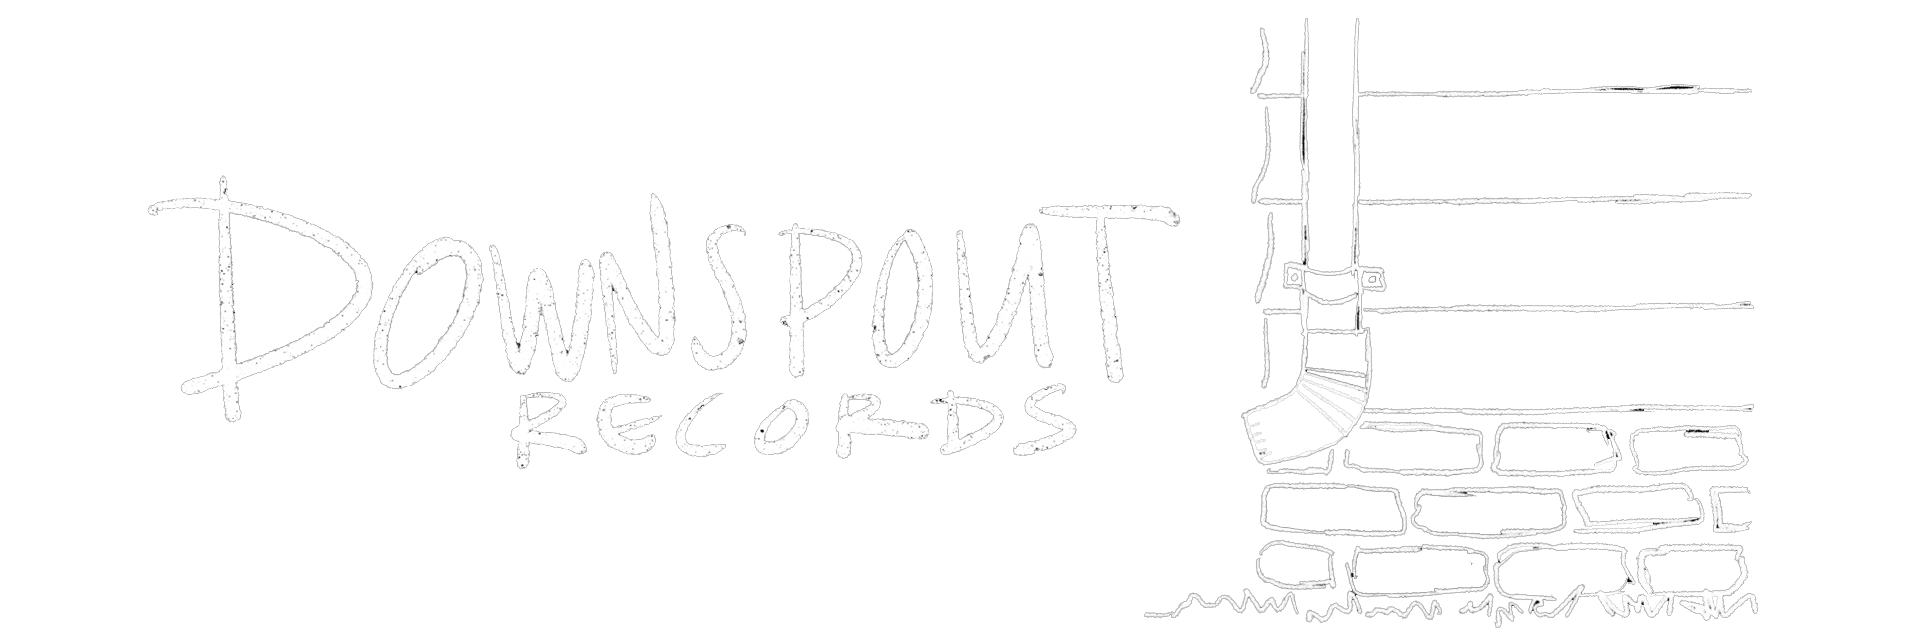 downspout records